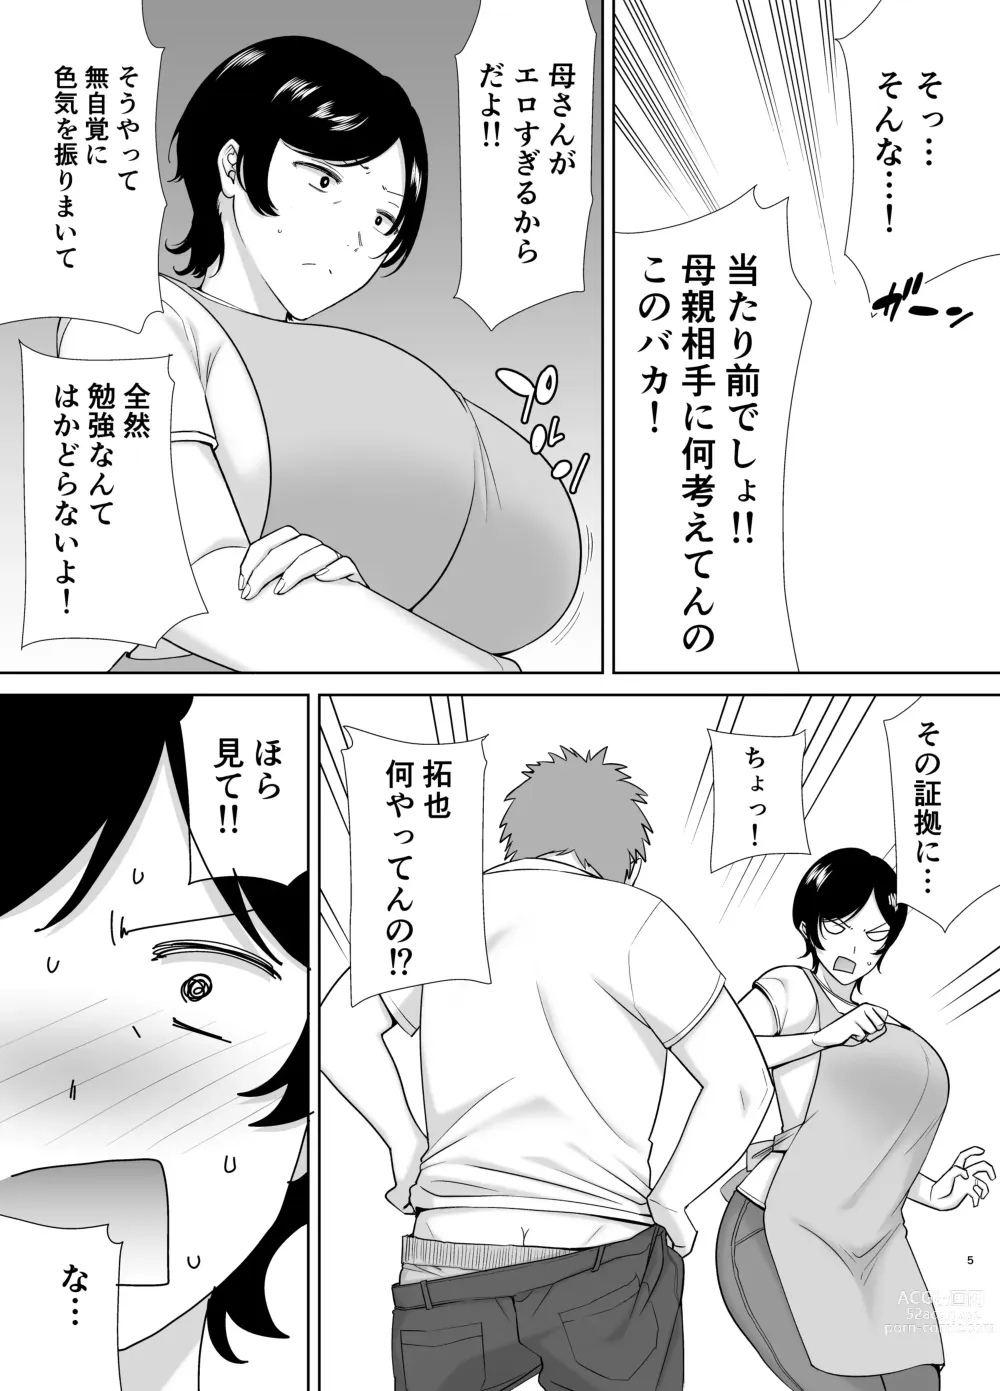 Page 4 of doujinshi 母さんだって女なんだよ！